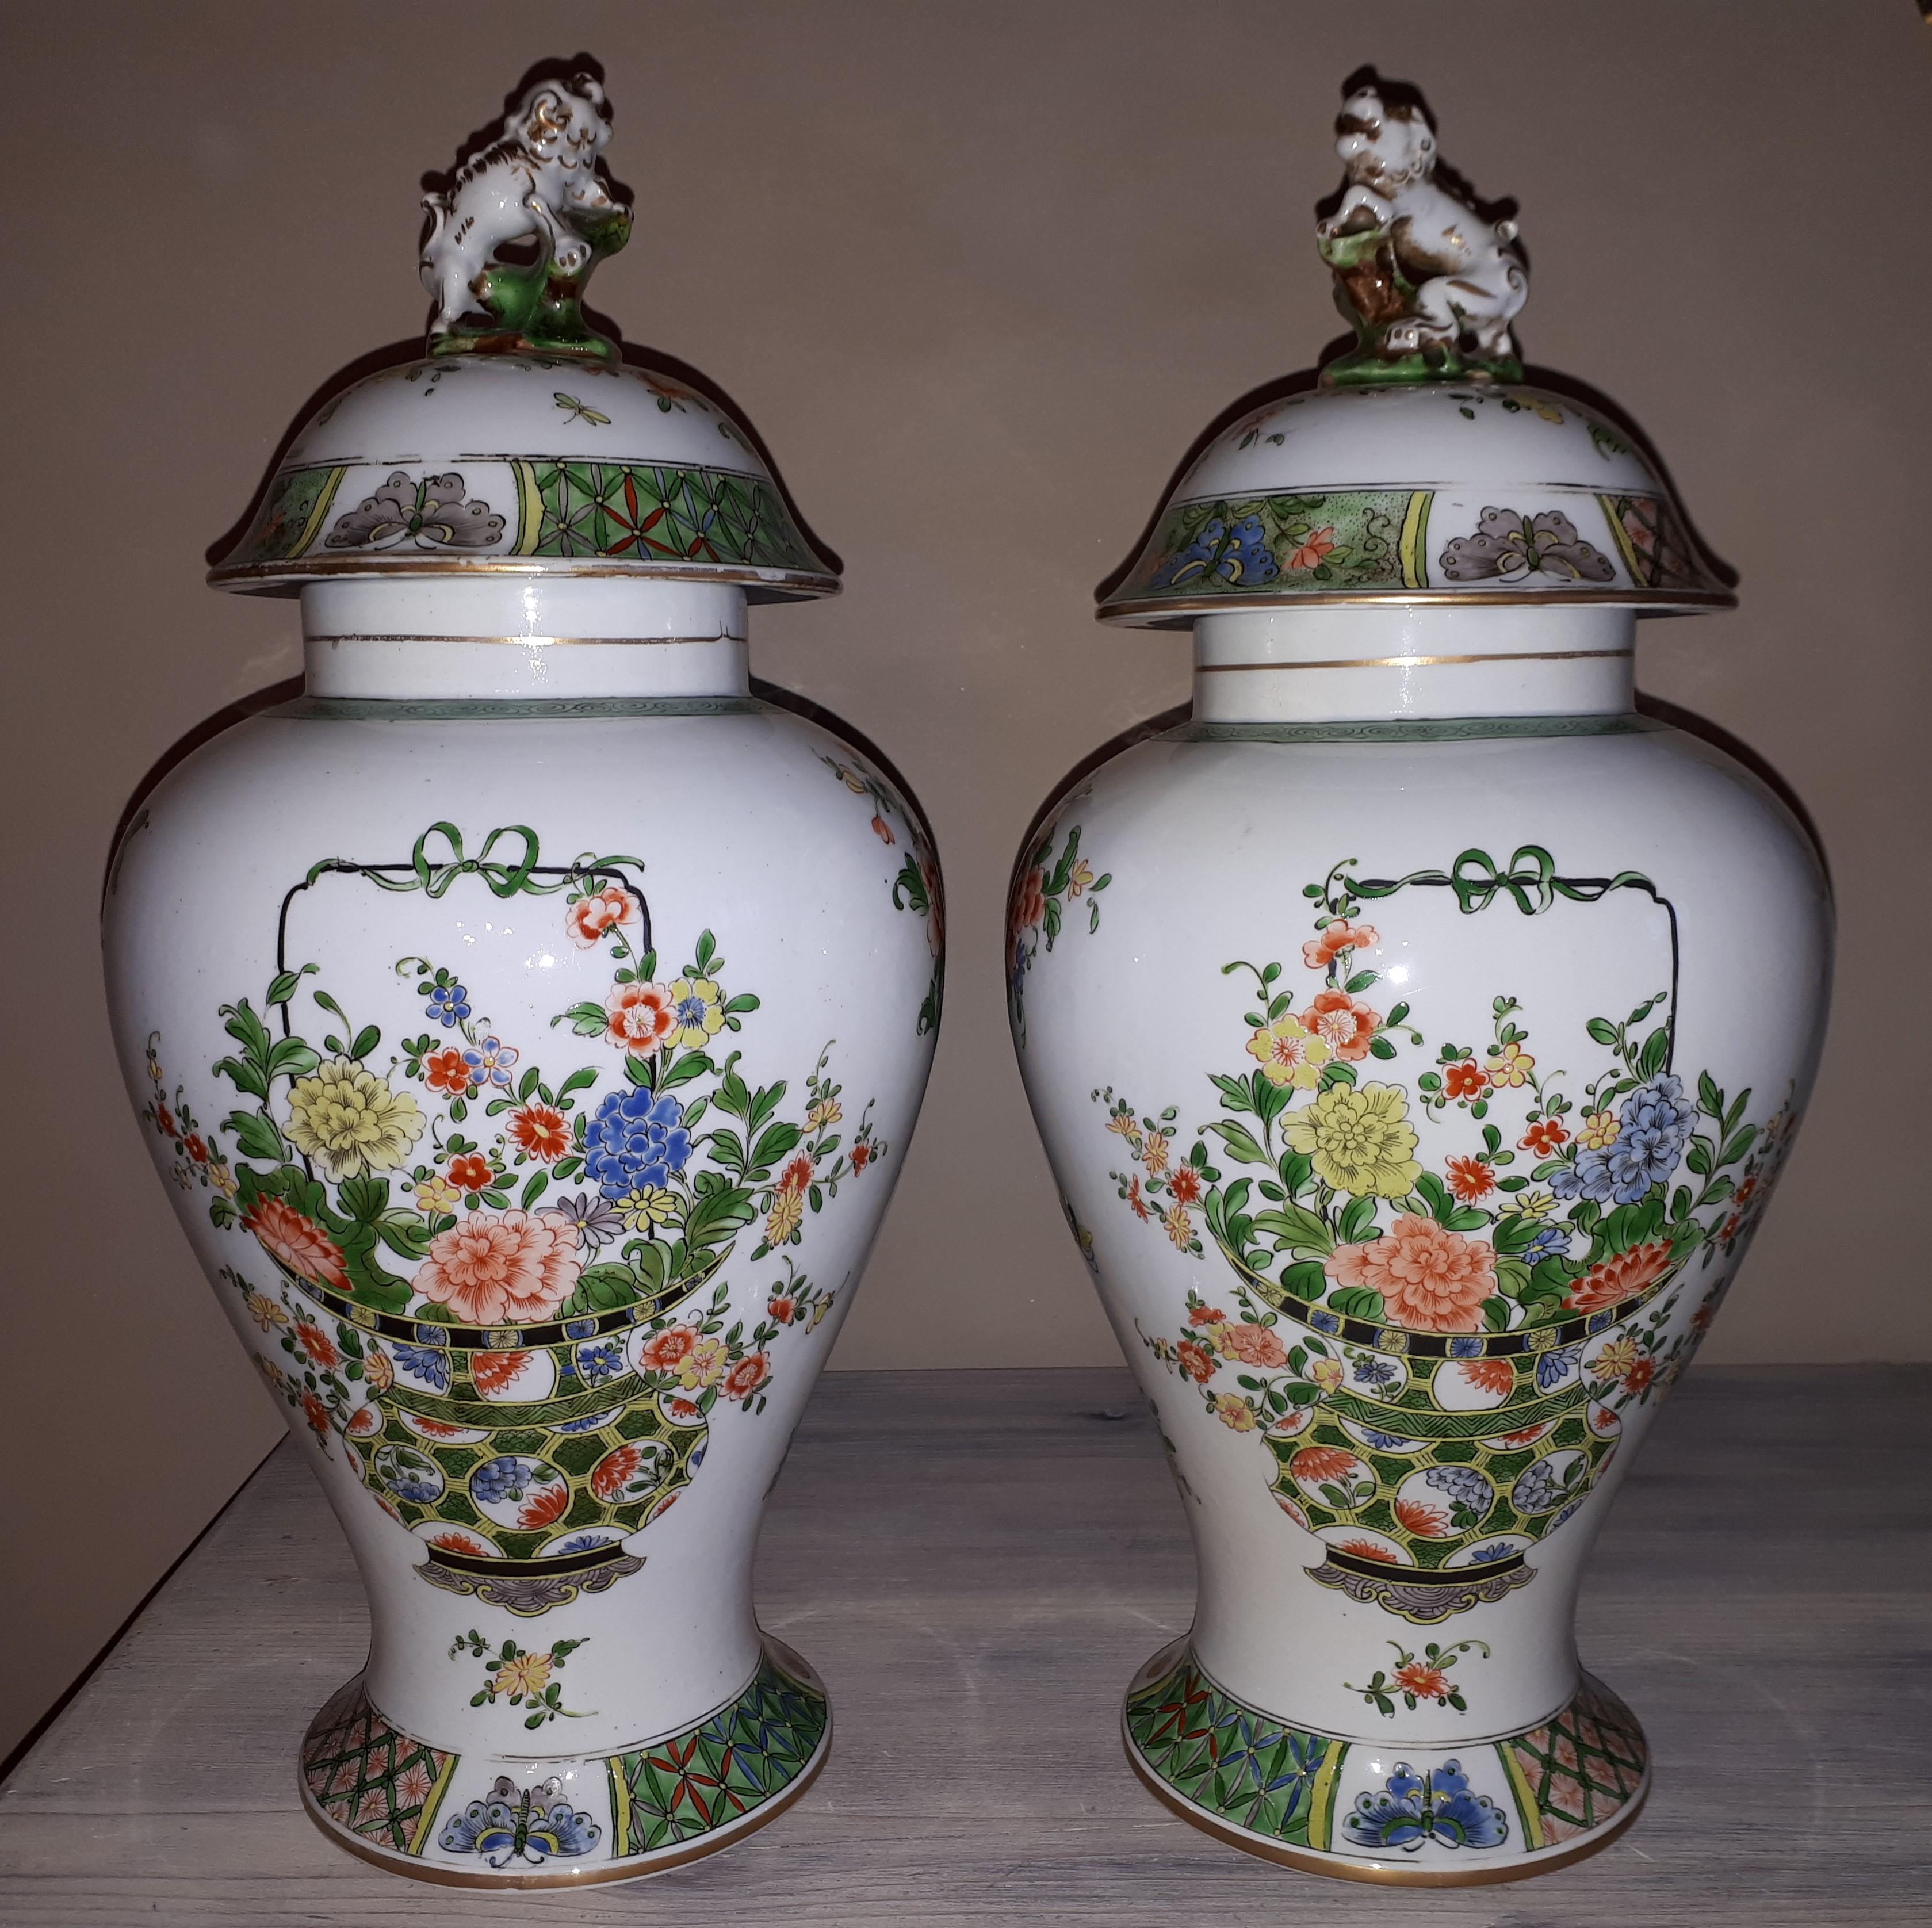 Pair of covered porcelain vases with Famille Verte enamels decorated with flowered baskets and birds among peonies.
Samson Manufacture, France late 19th - early 20th century.